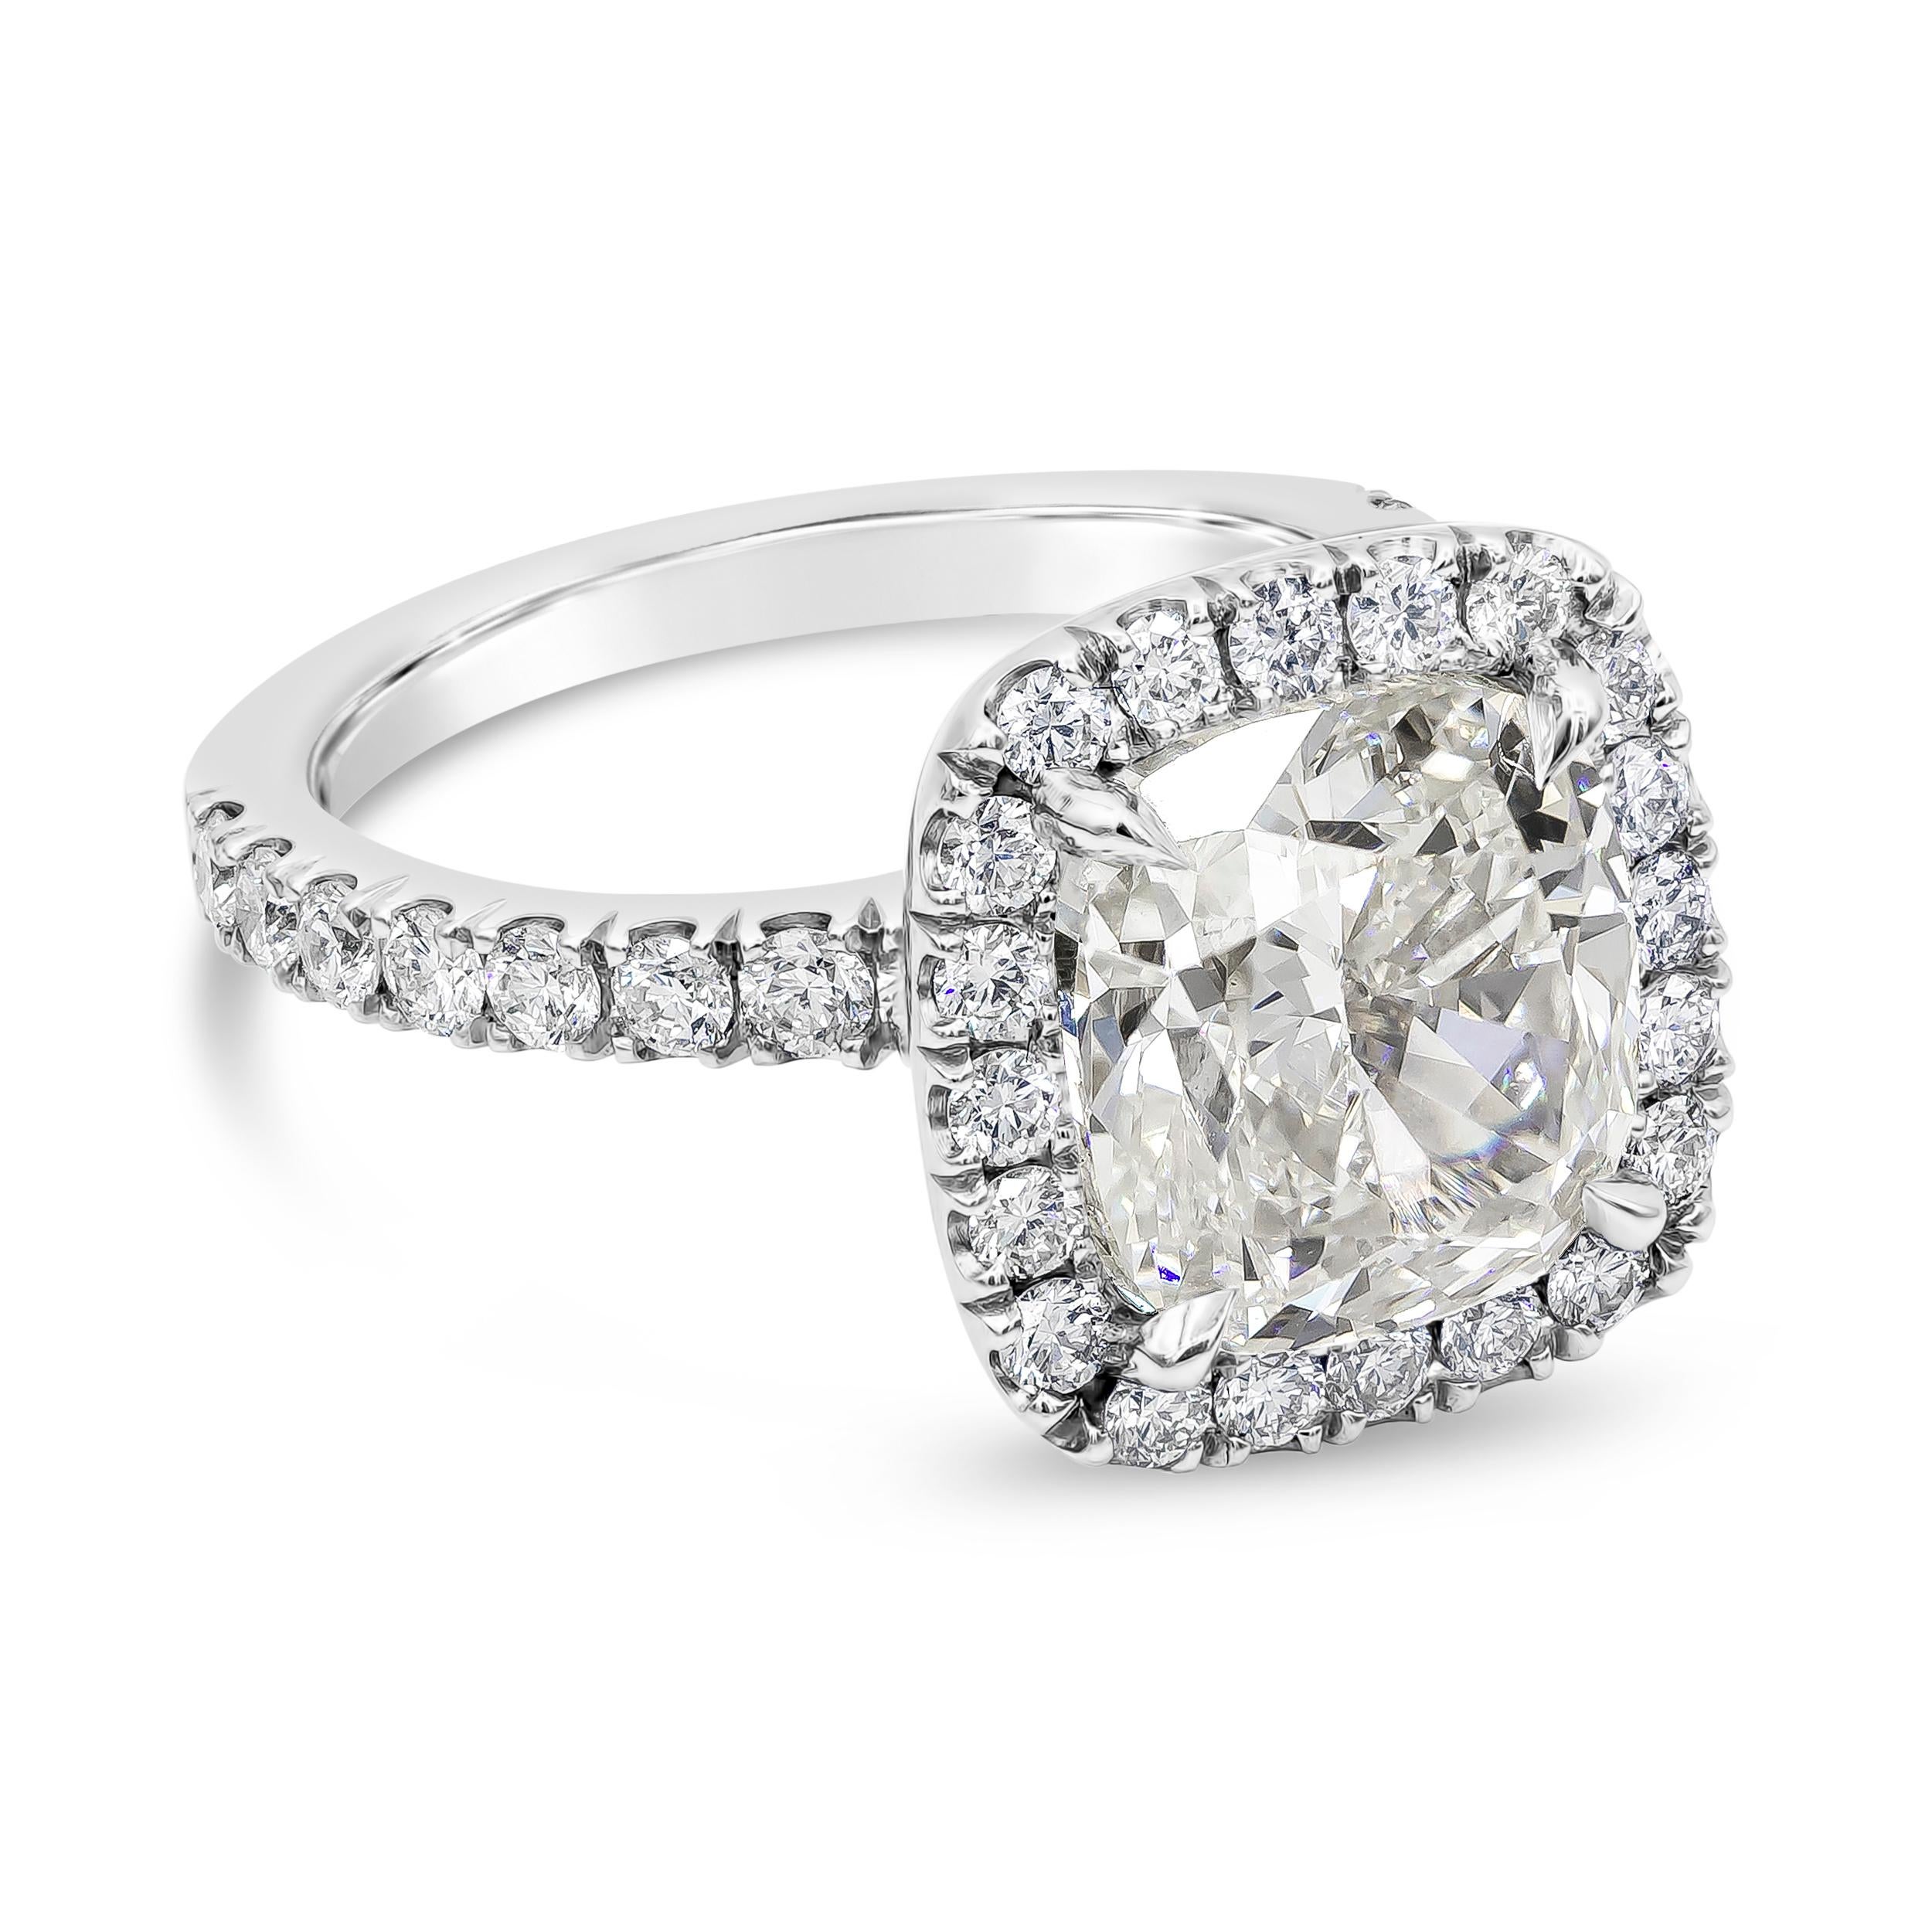 A contemporary piece of jewelry showcasing a 4.02 carat cushion cut diamond, surrounded by round brilliant diamonds in a polished platinum mounting. GIA certified the center diamond as J color, VS2 clarity. Accent diamonds weigh 0.98 carats total.